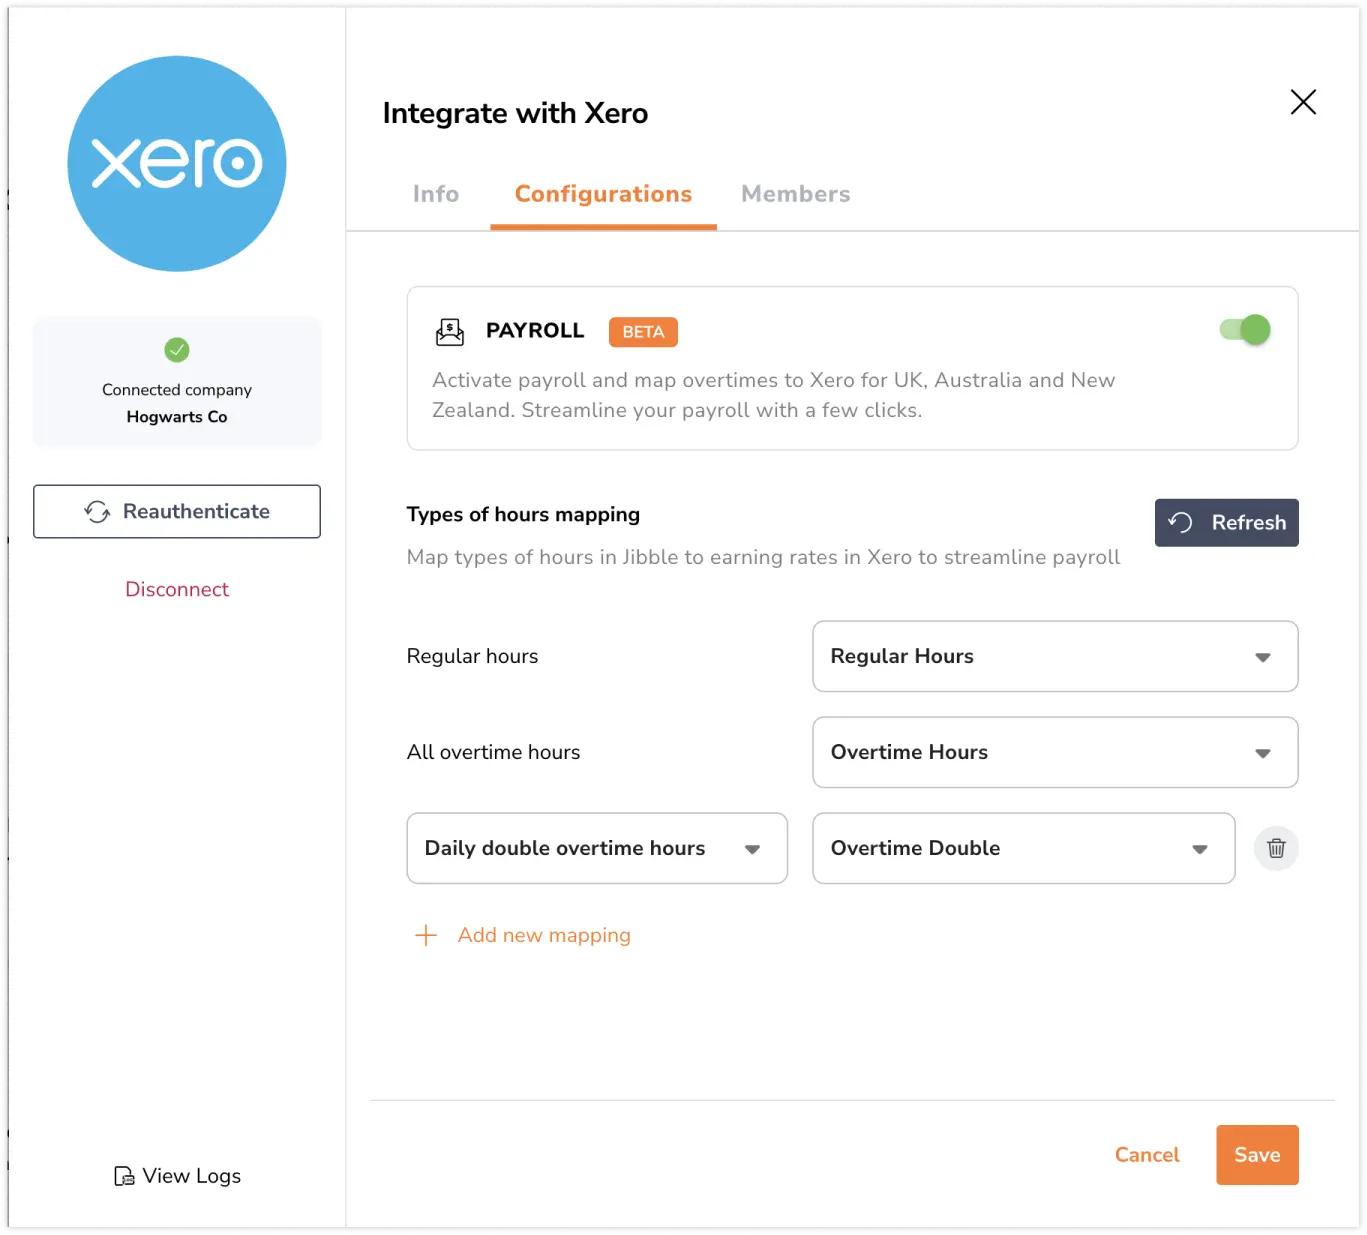 Adding hour mapping for Jibble and Xero